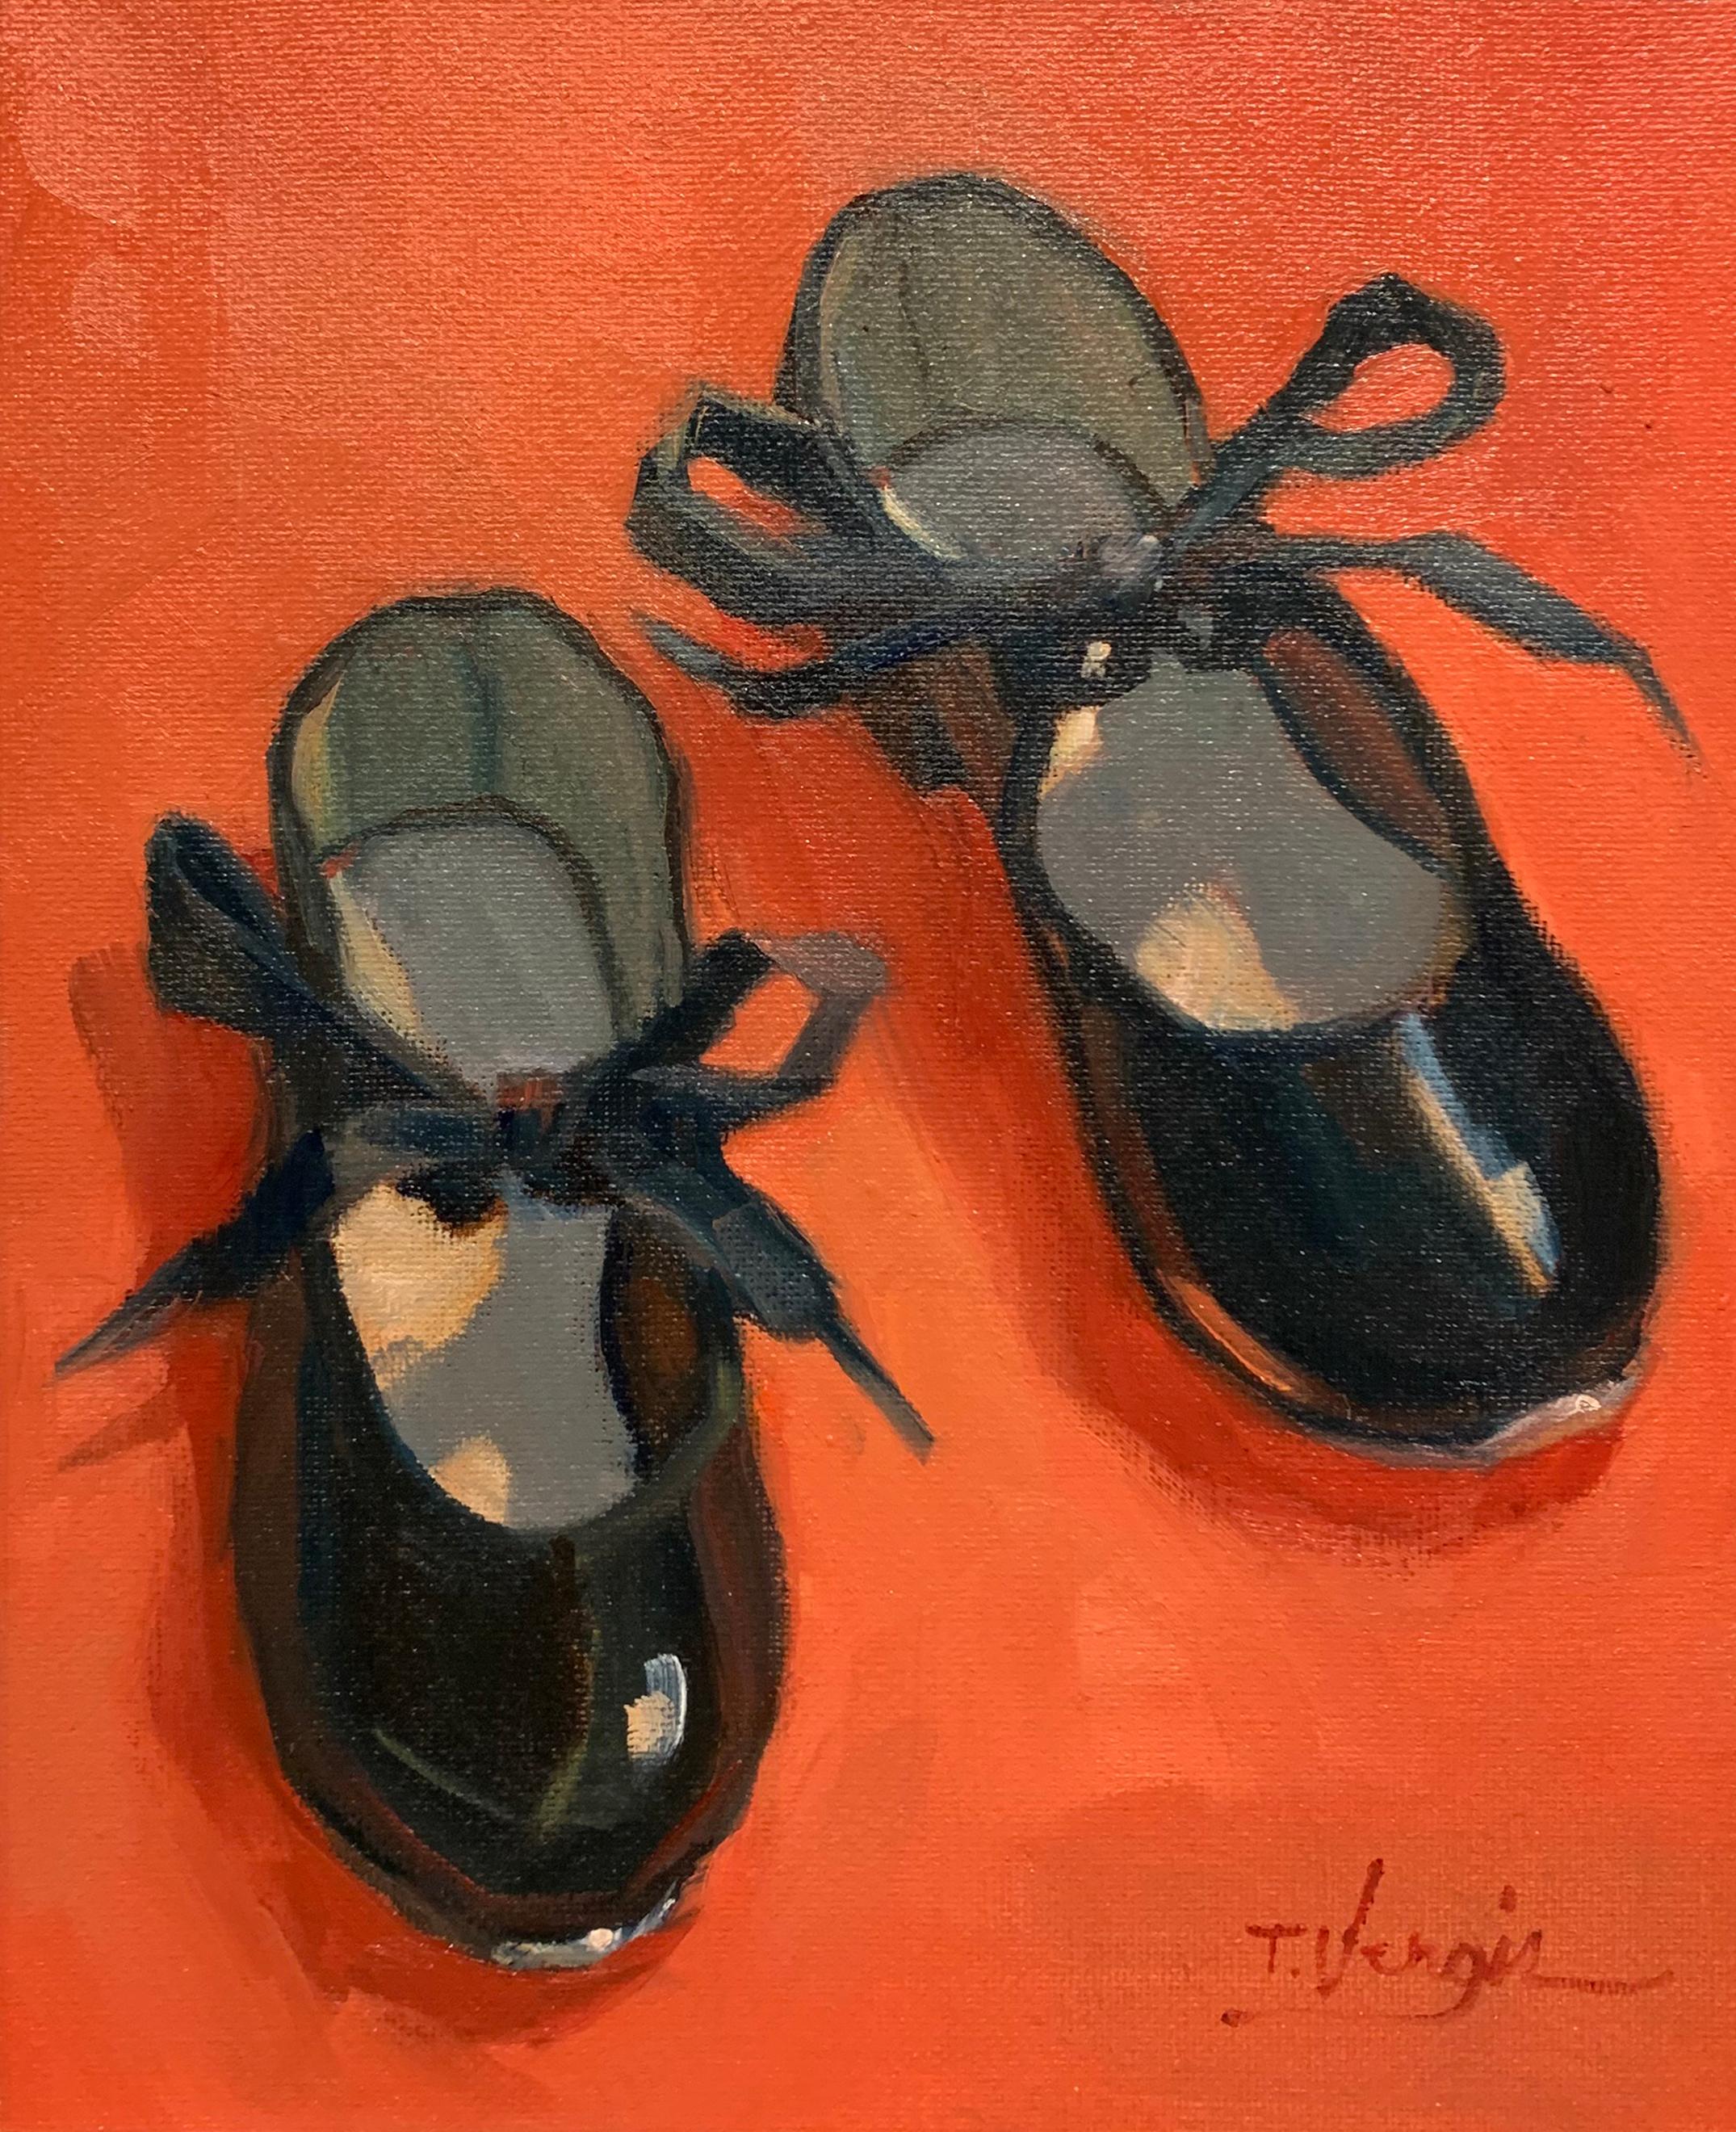 "Little Black Tap Shoes 2" is an 8" x 10" oil on canvas, still life painting from 2019 by American artist Trisha Vergis. It is signed "T. Vergis" in the lower right.
Trisha Vergis, born in 1962, is a painter, master woodcarver, and conservator based